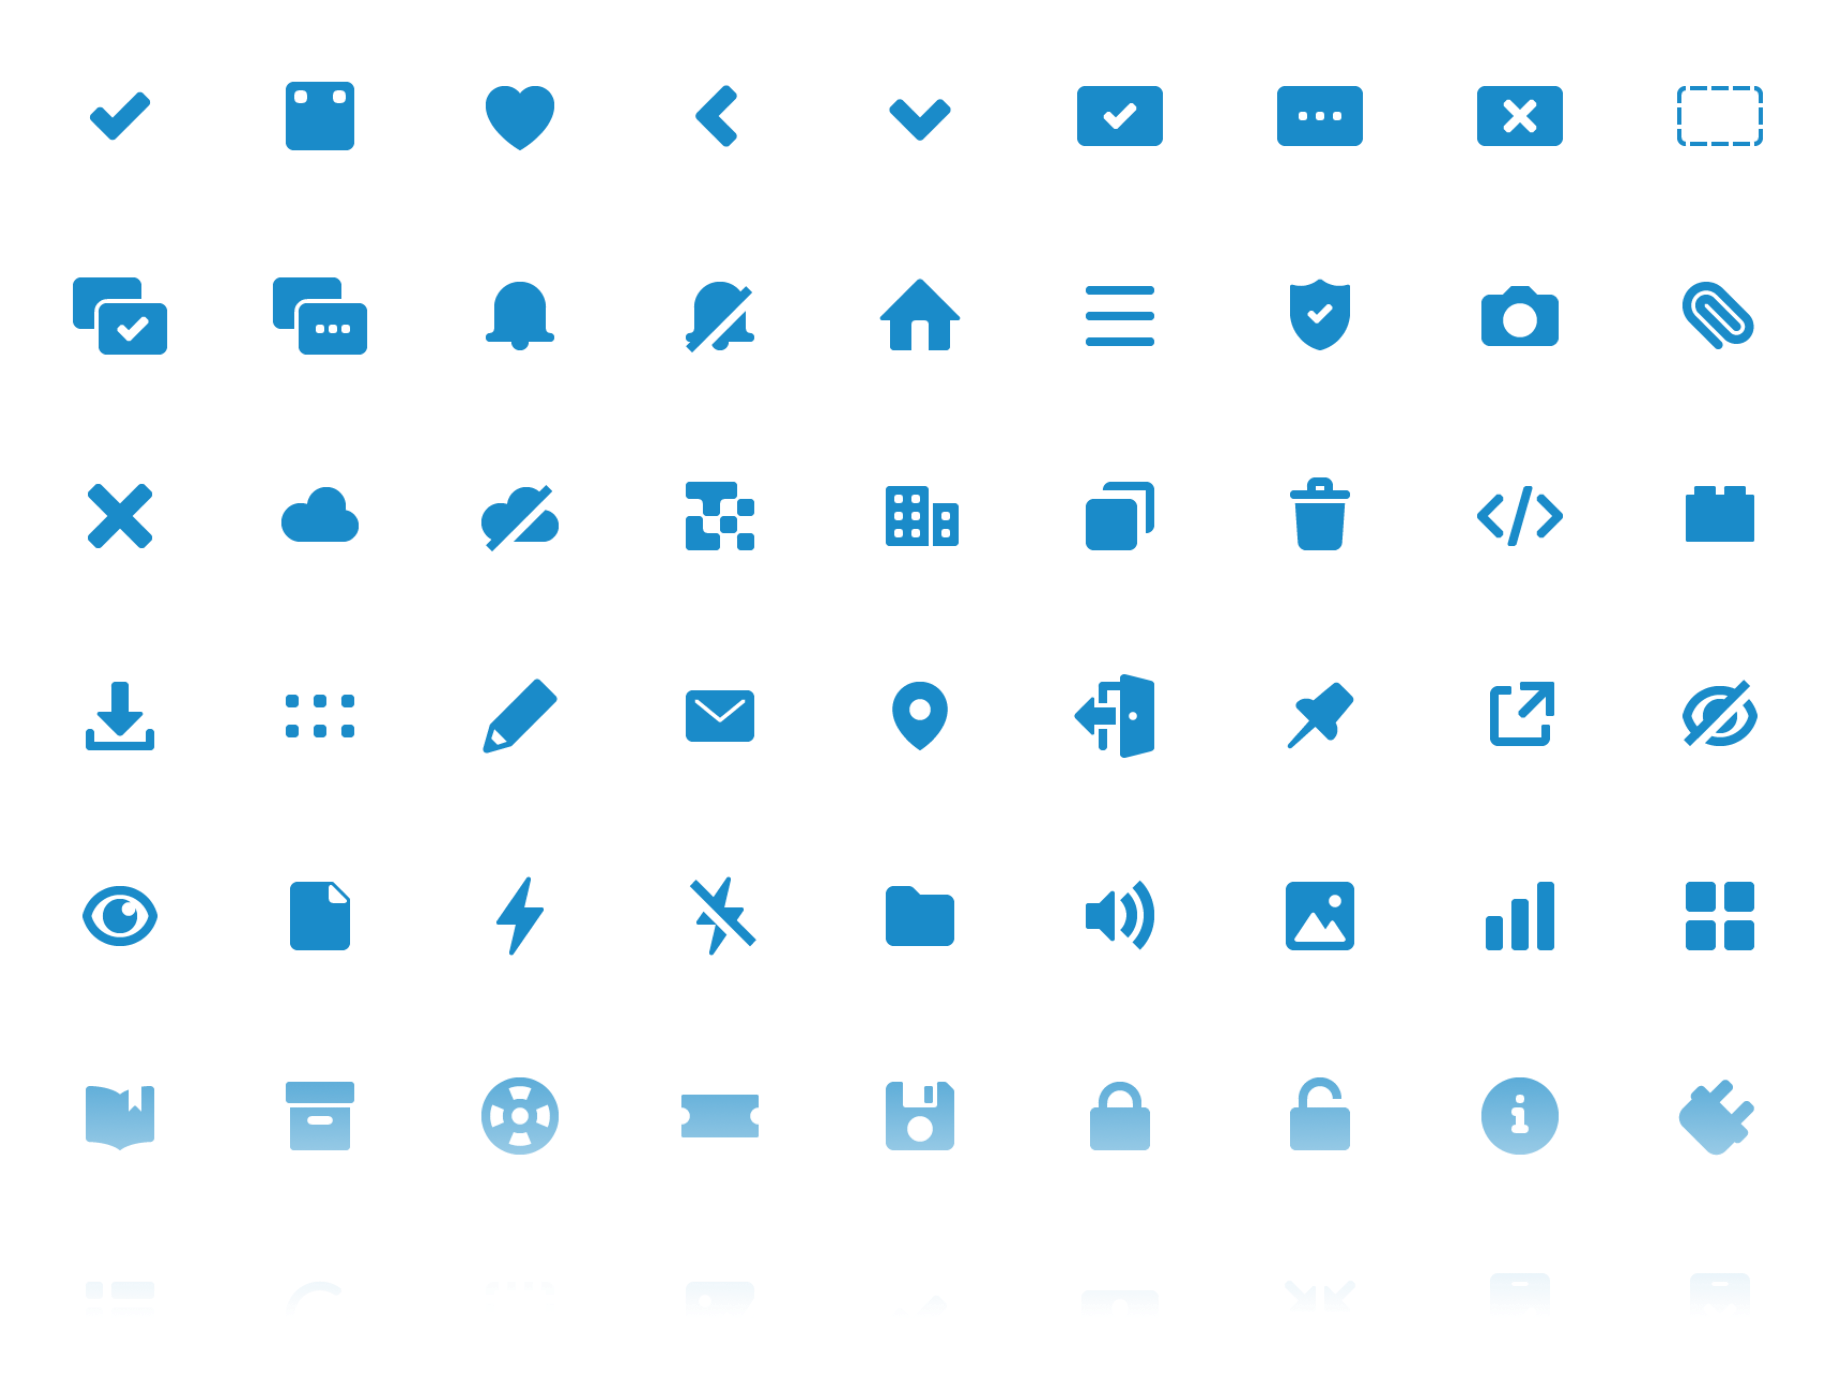 Some of the icons designed for the app